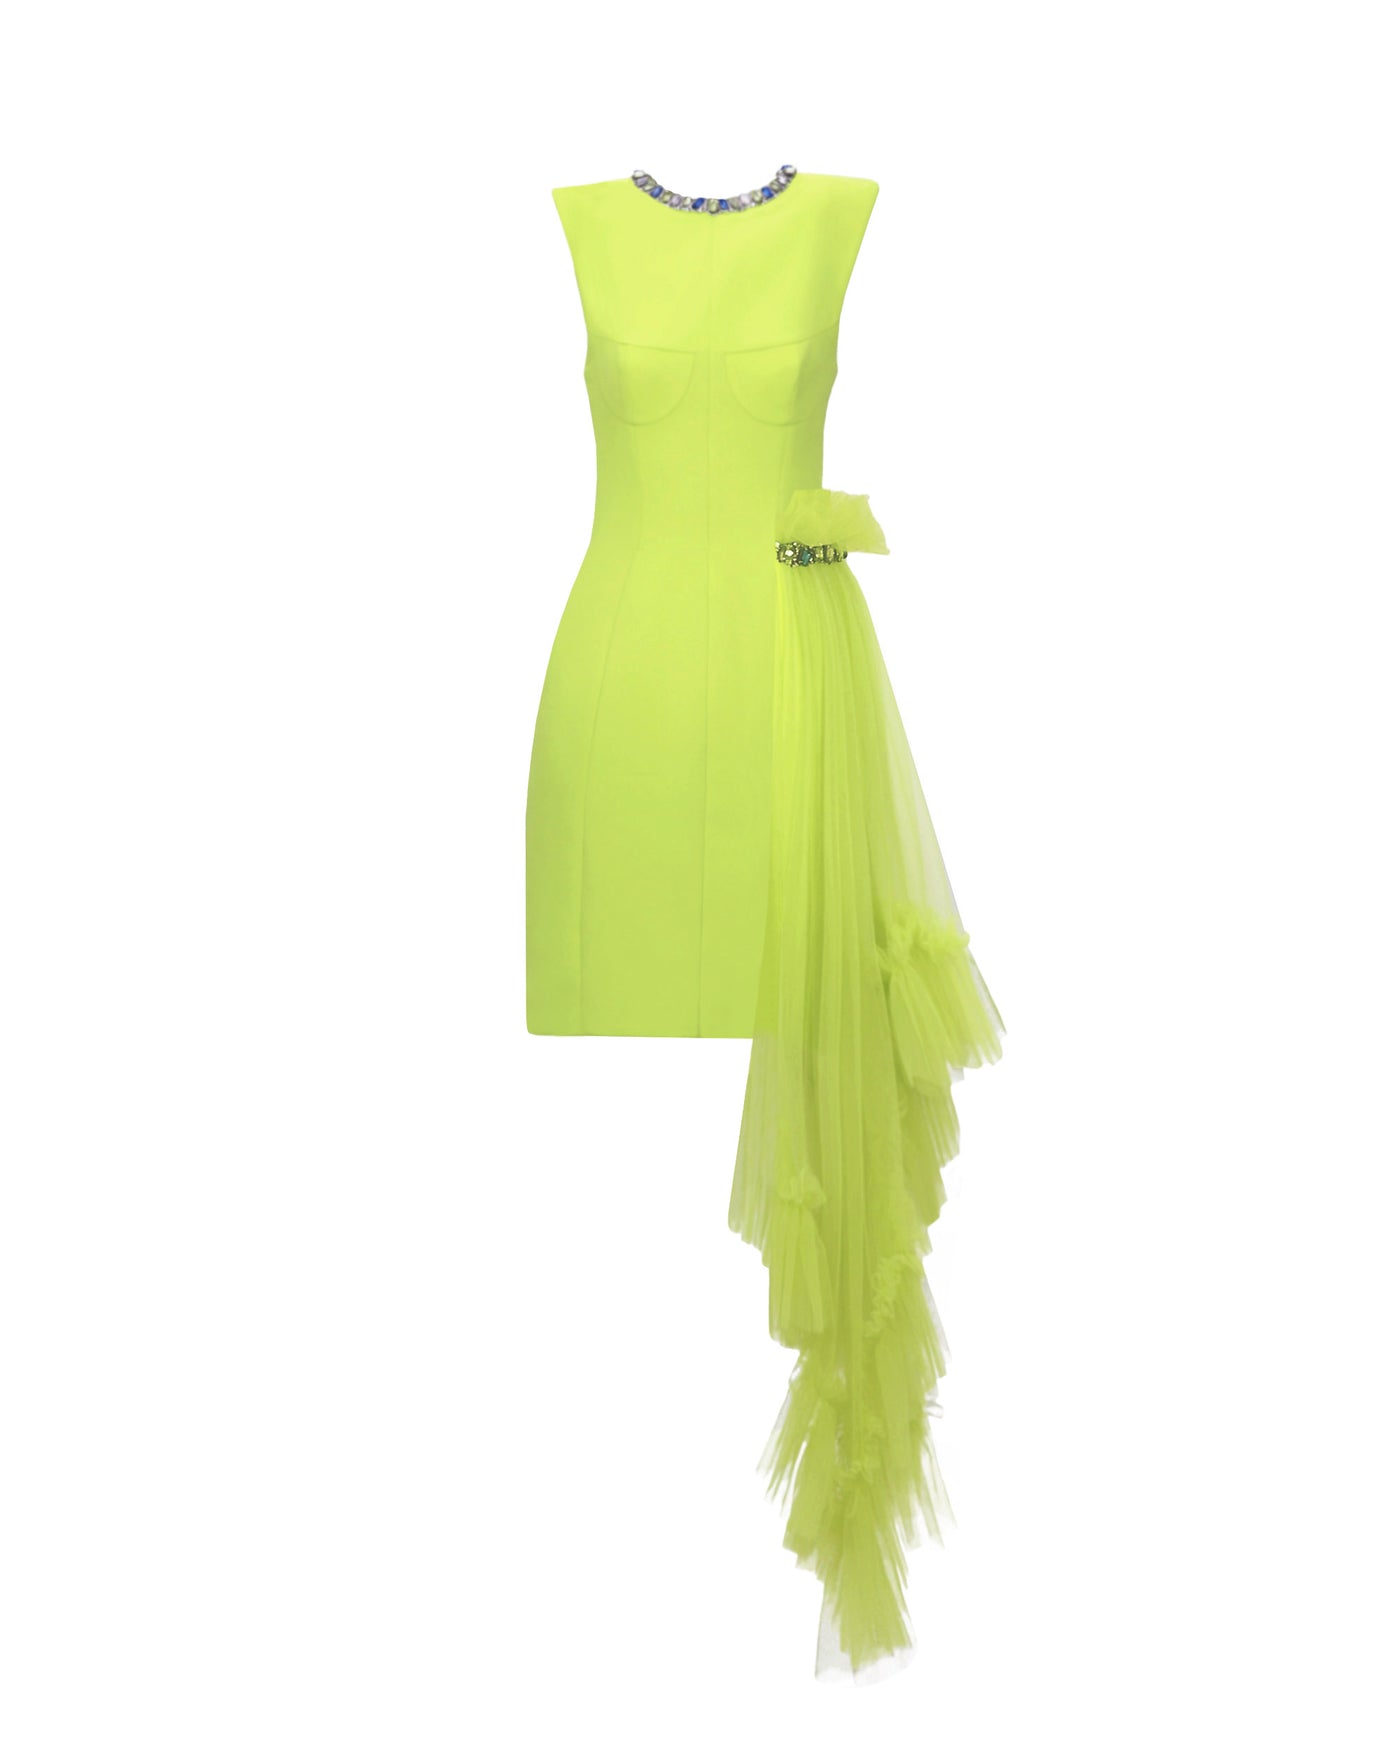 A short structured lime dress with padded shoulders and a round beaded neckline. It features an asymmetrical tulle ruffles on the side with a beaded line.